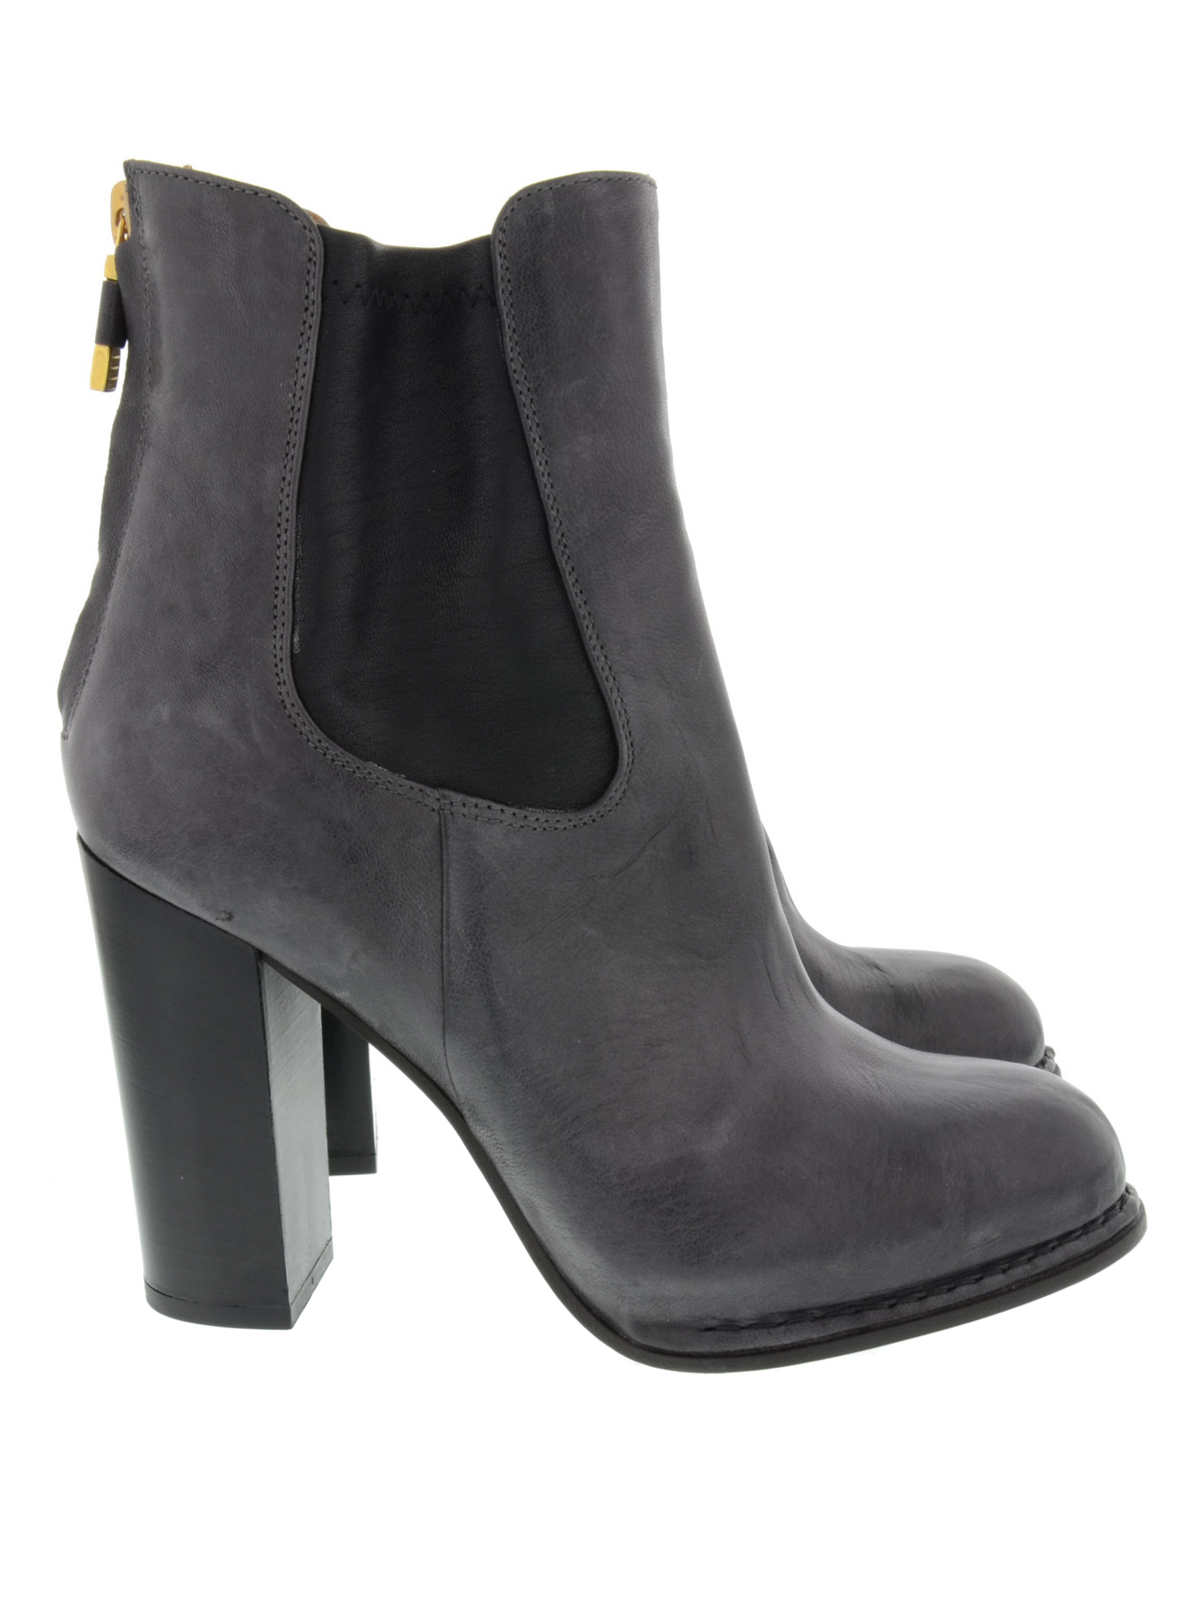 Remission Revisor lave mad Ankle boots Alberto Fermani - Rear zip leather ankle boots - REB004NERO